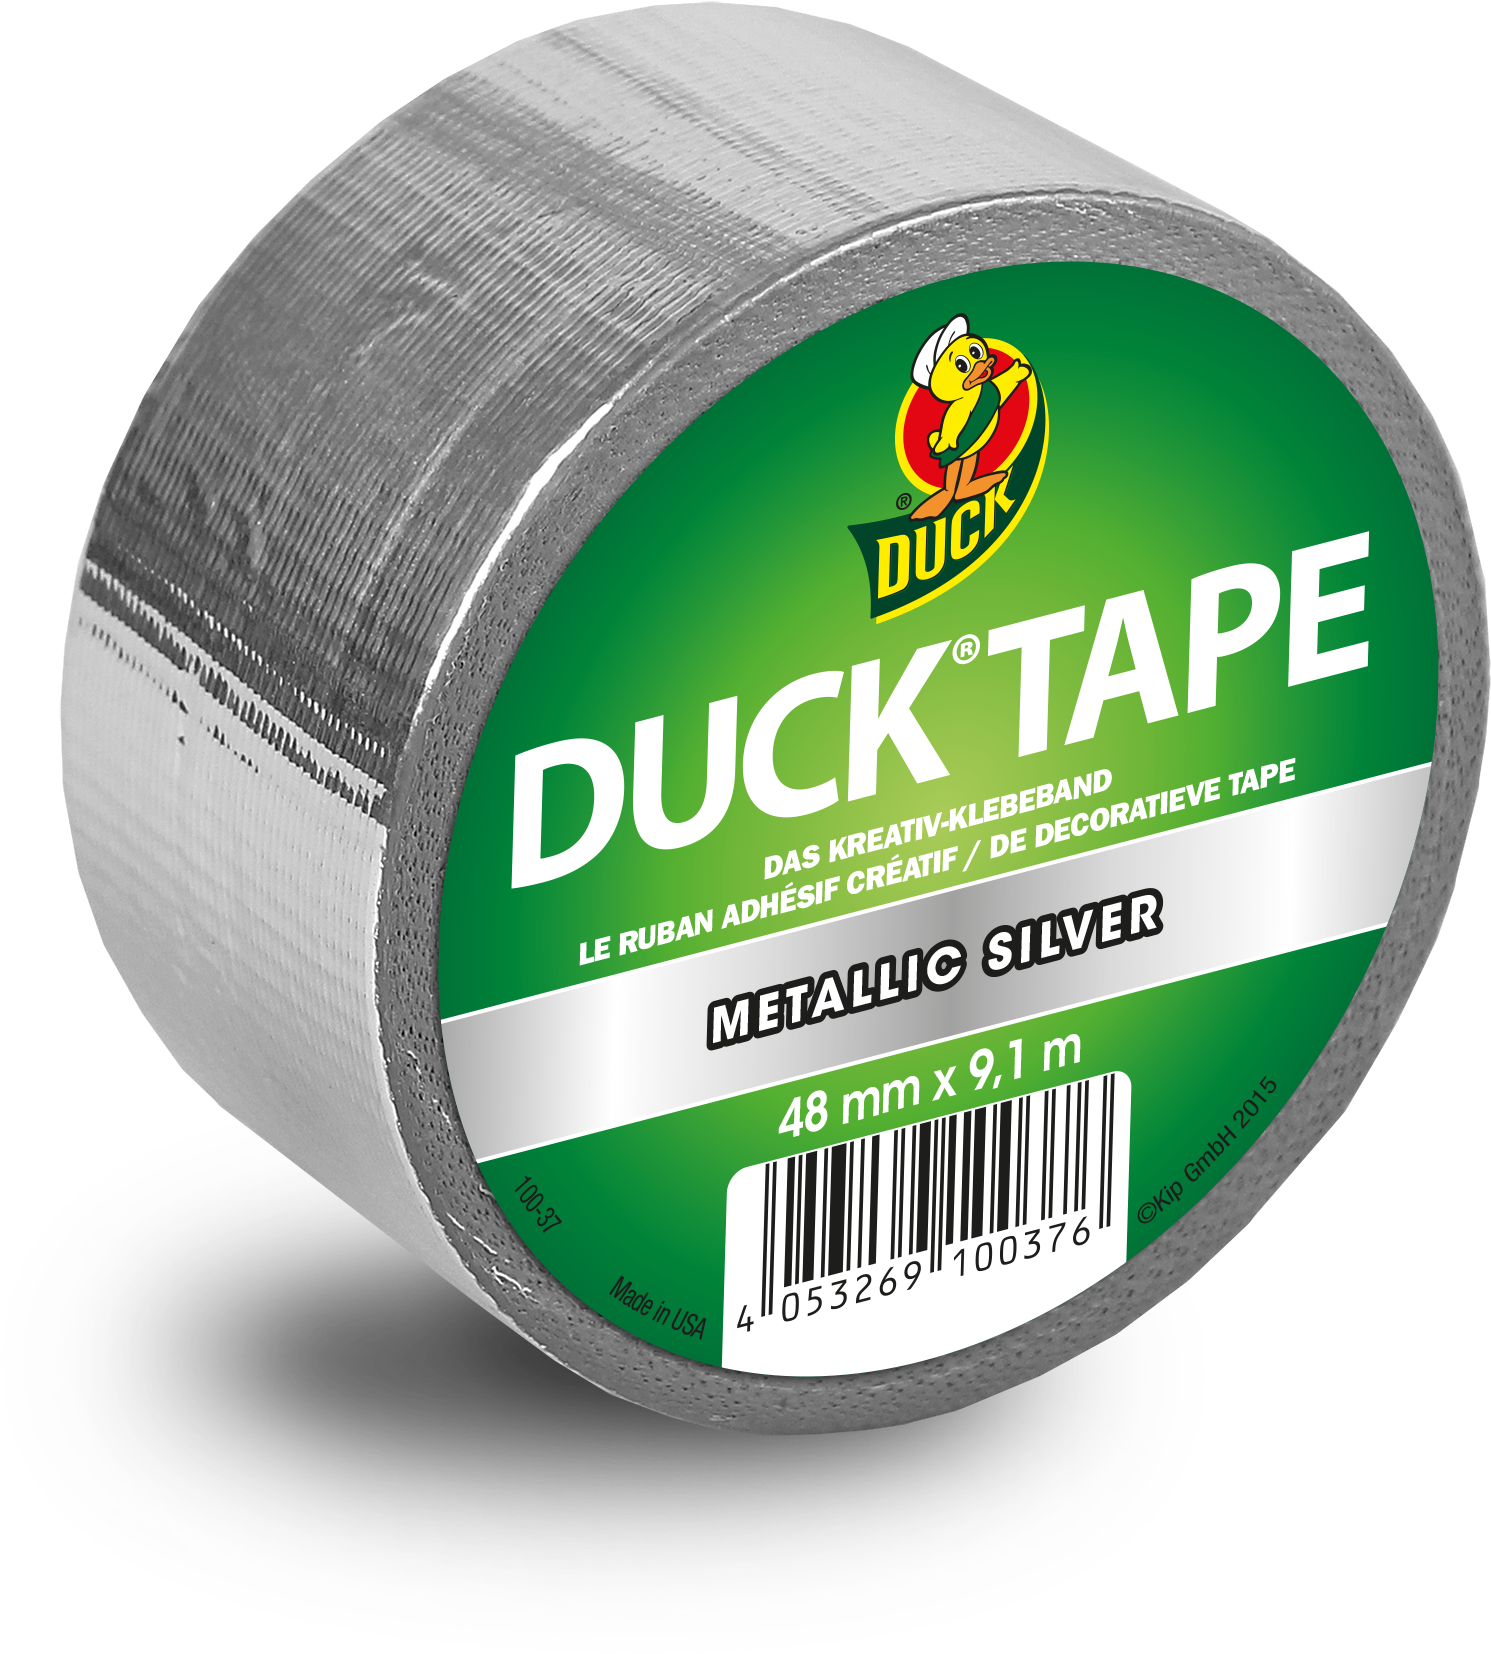 Duck Tape Metalic Silver - Ducktape Roll Gold 48 Mm X 9,1 M (100-36) (2362x2362), Png Download